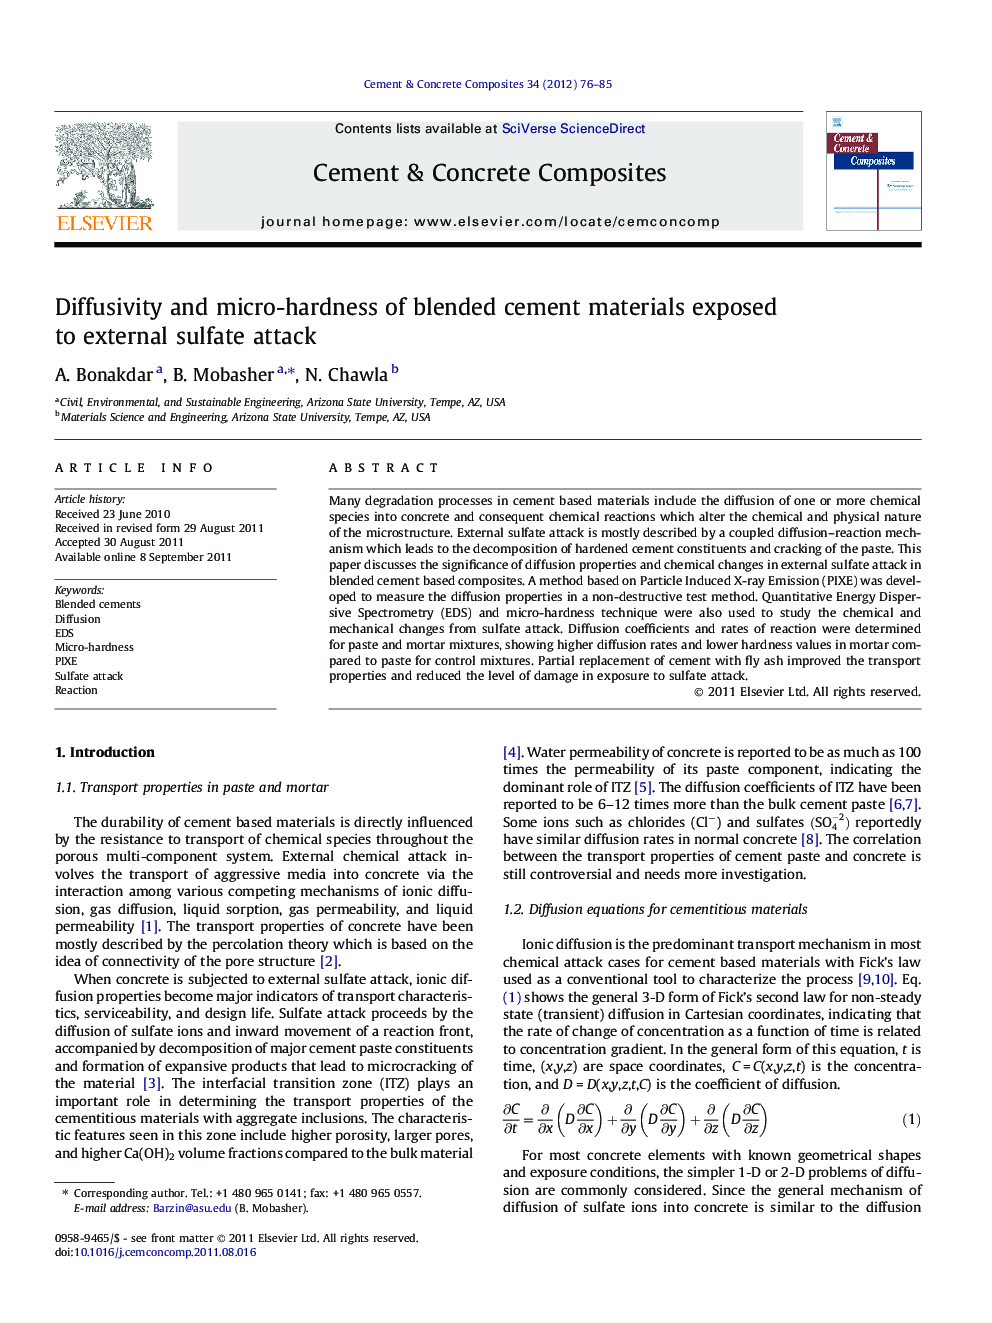 Diffusivity and micro-hardness of blended cement materials exposed to external sulfate attack